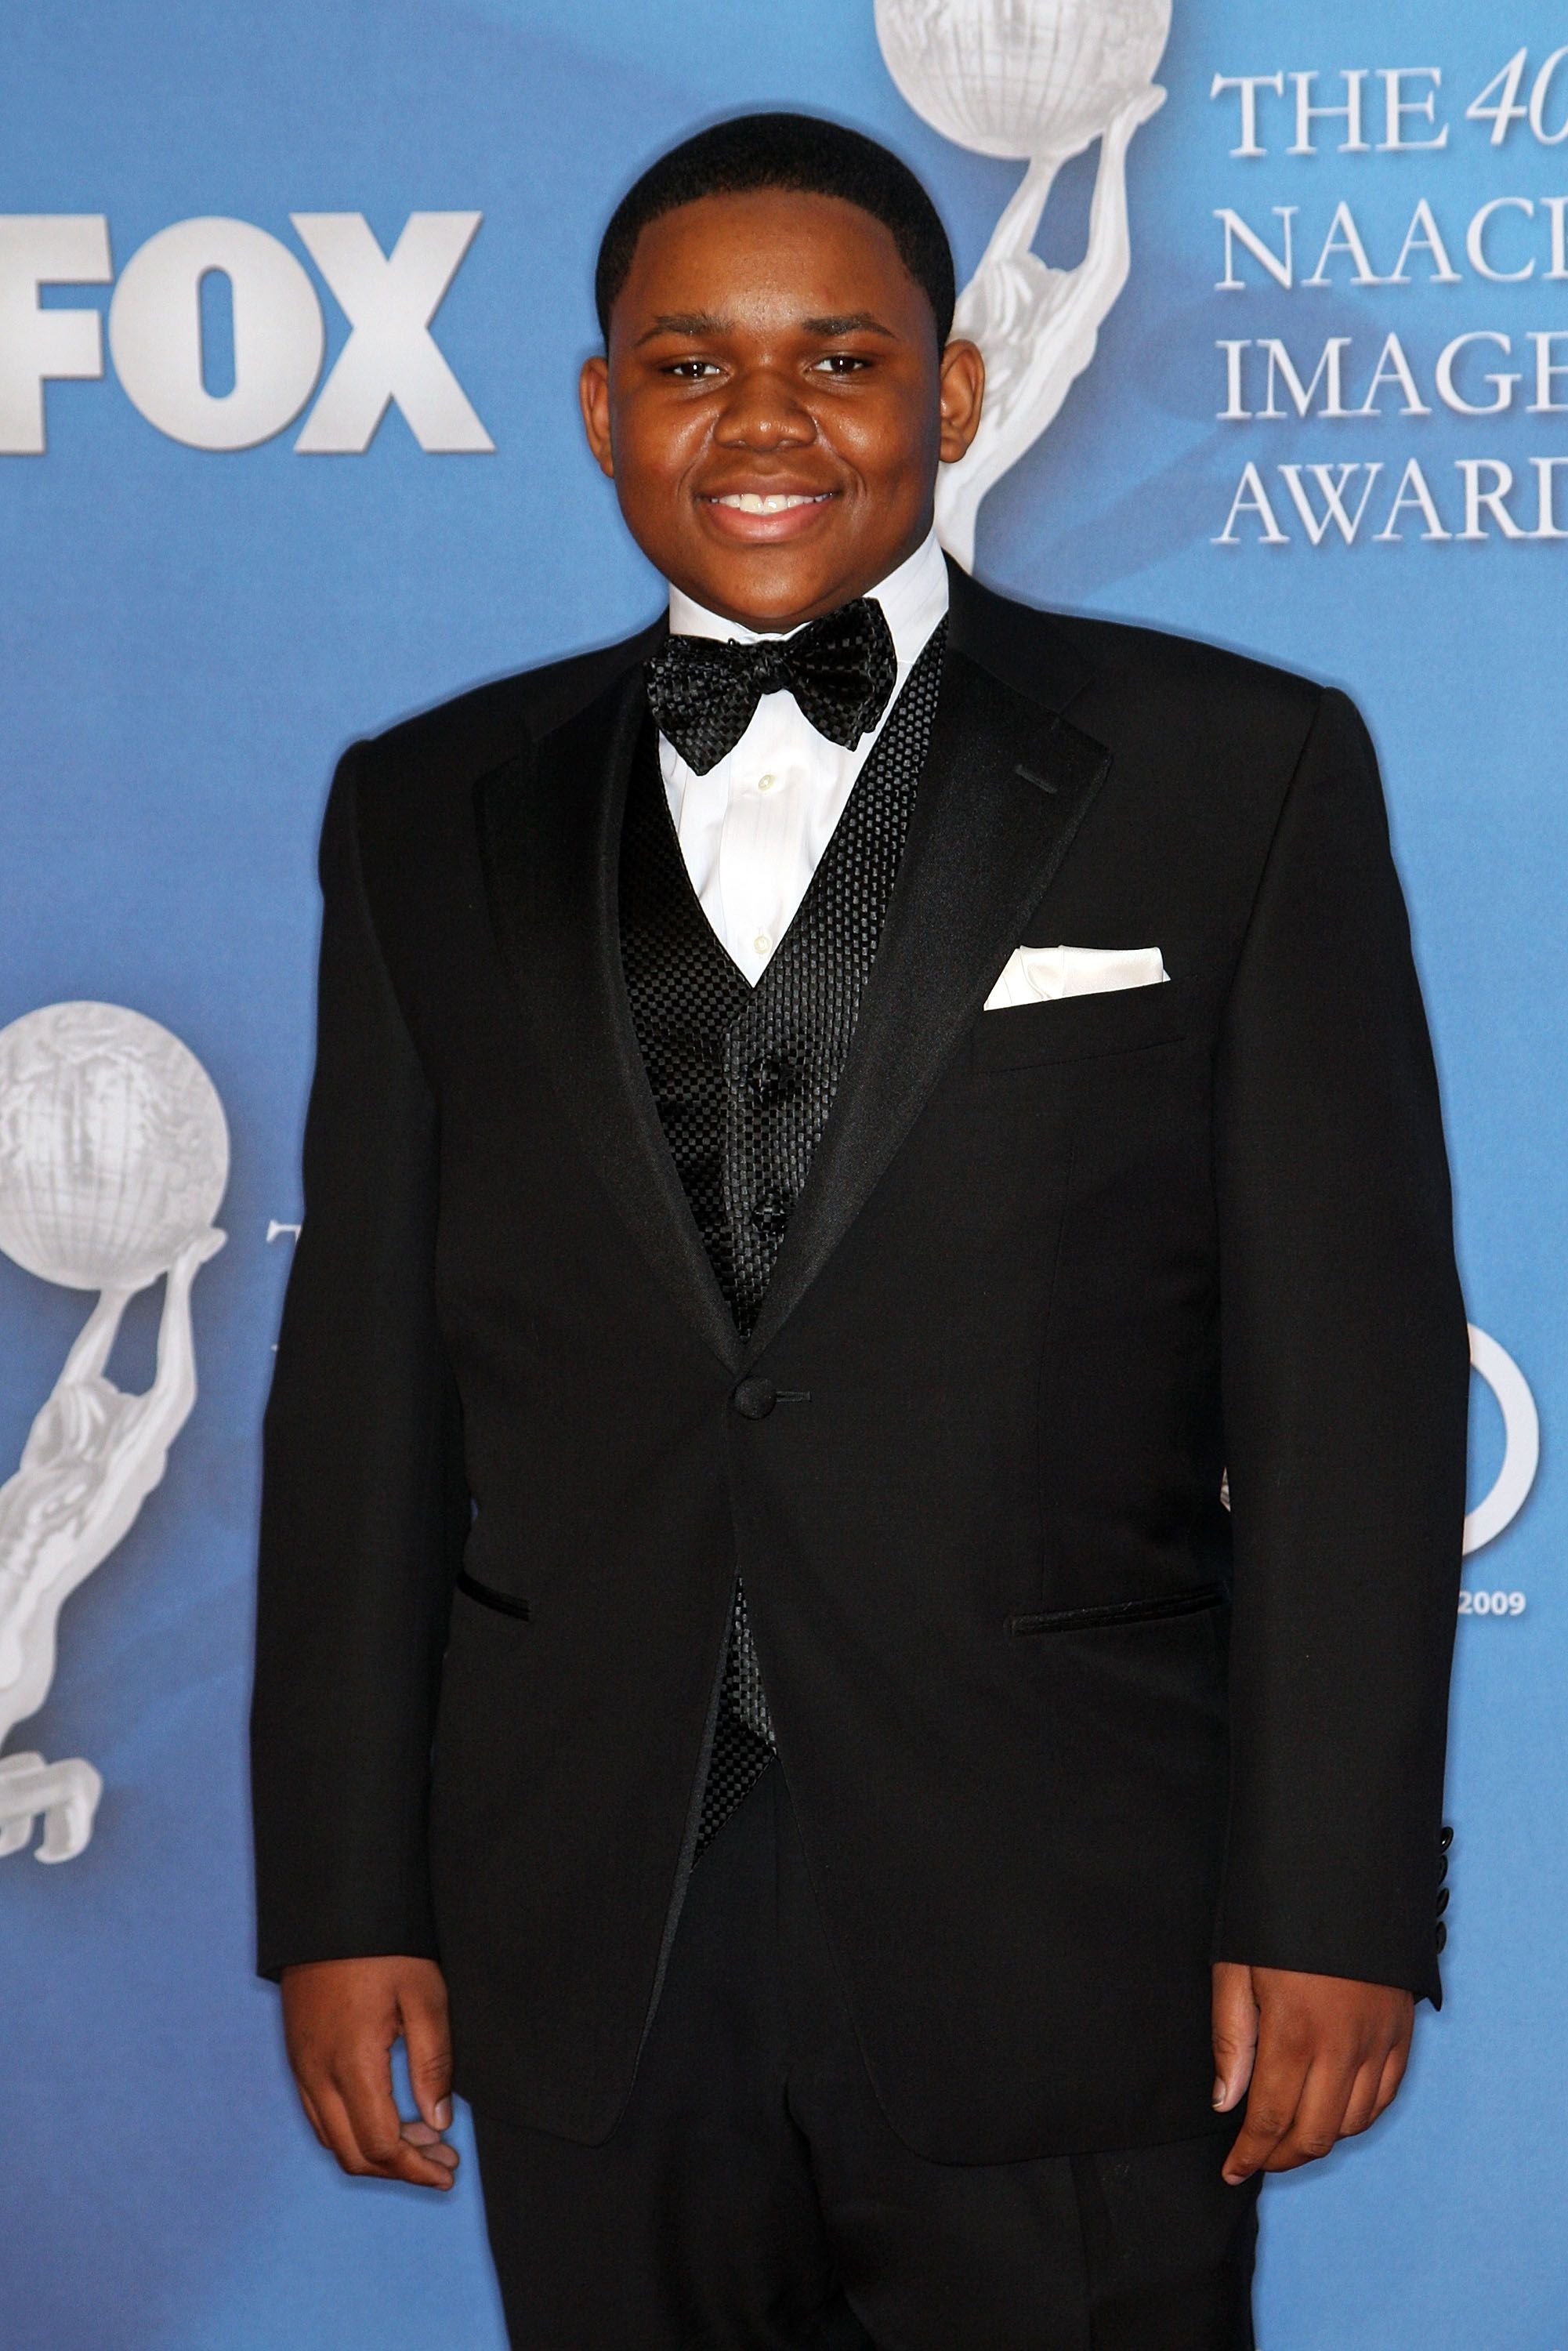 Larramie Doc Shaw at the 40th NAACP Image Awards on February 12, 2009 | Photo: Getty Images